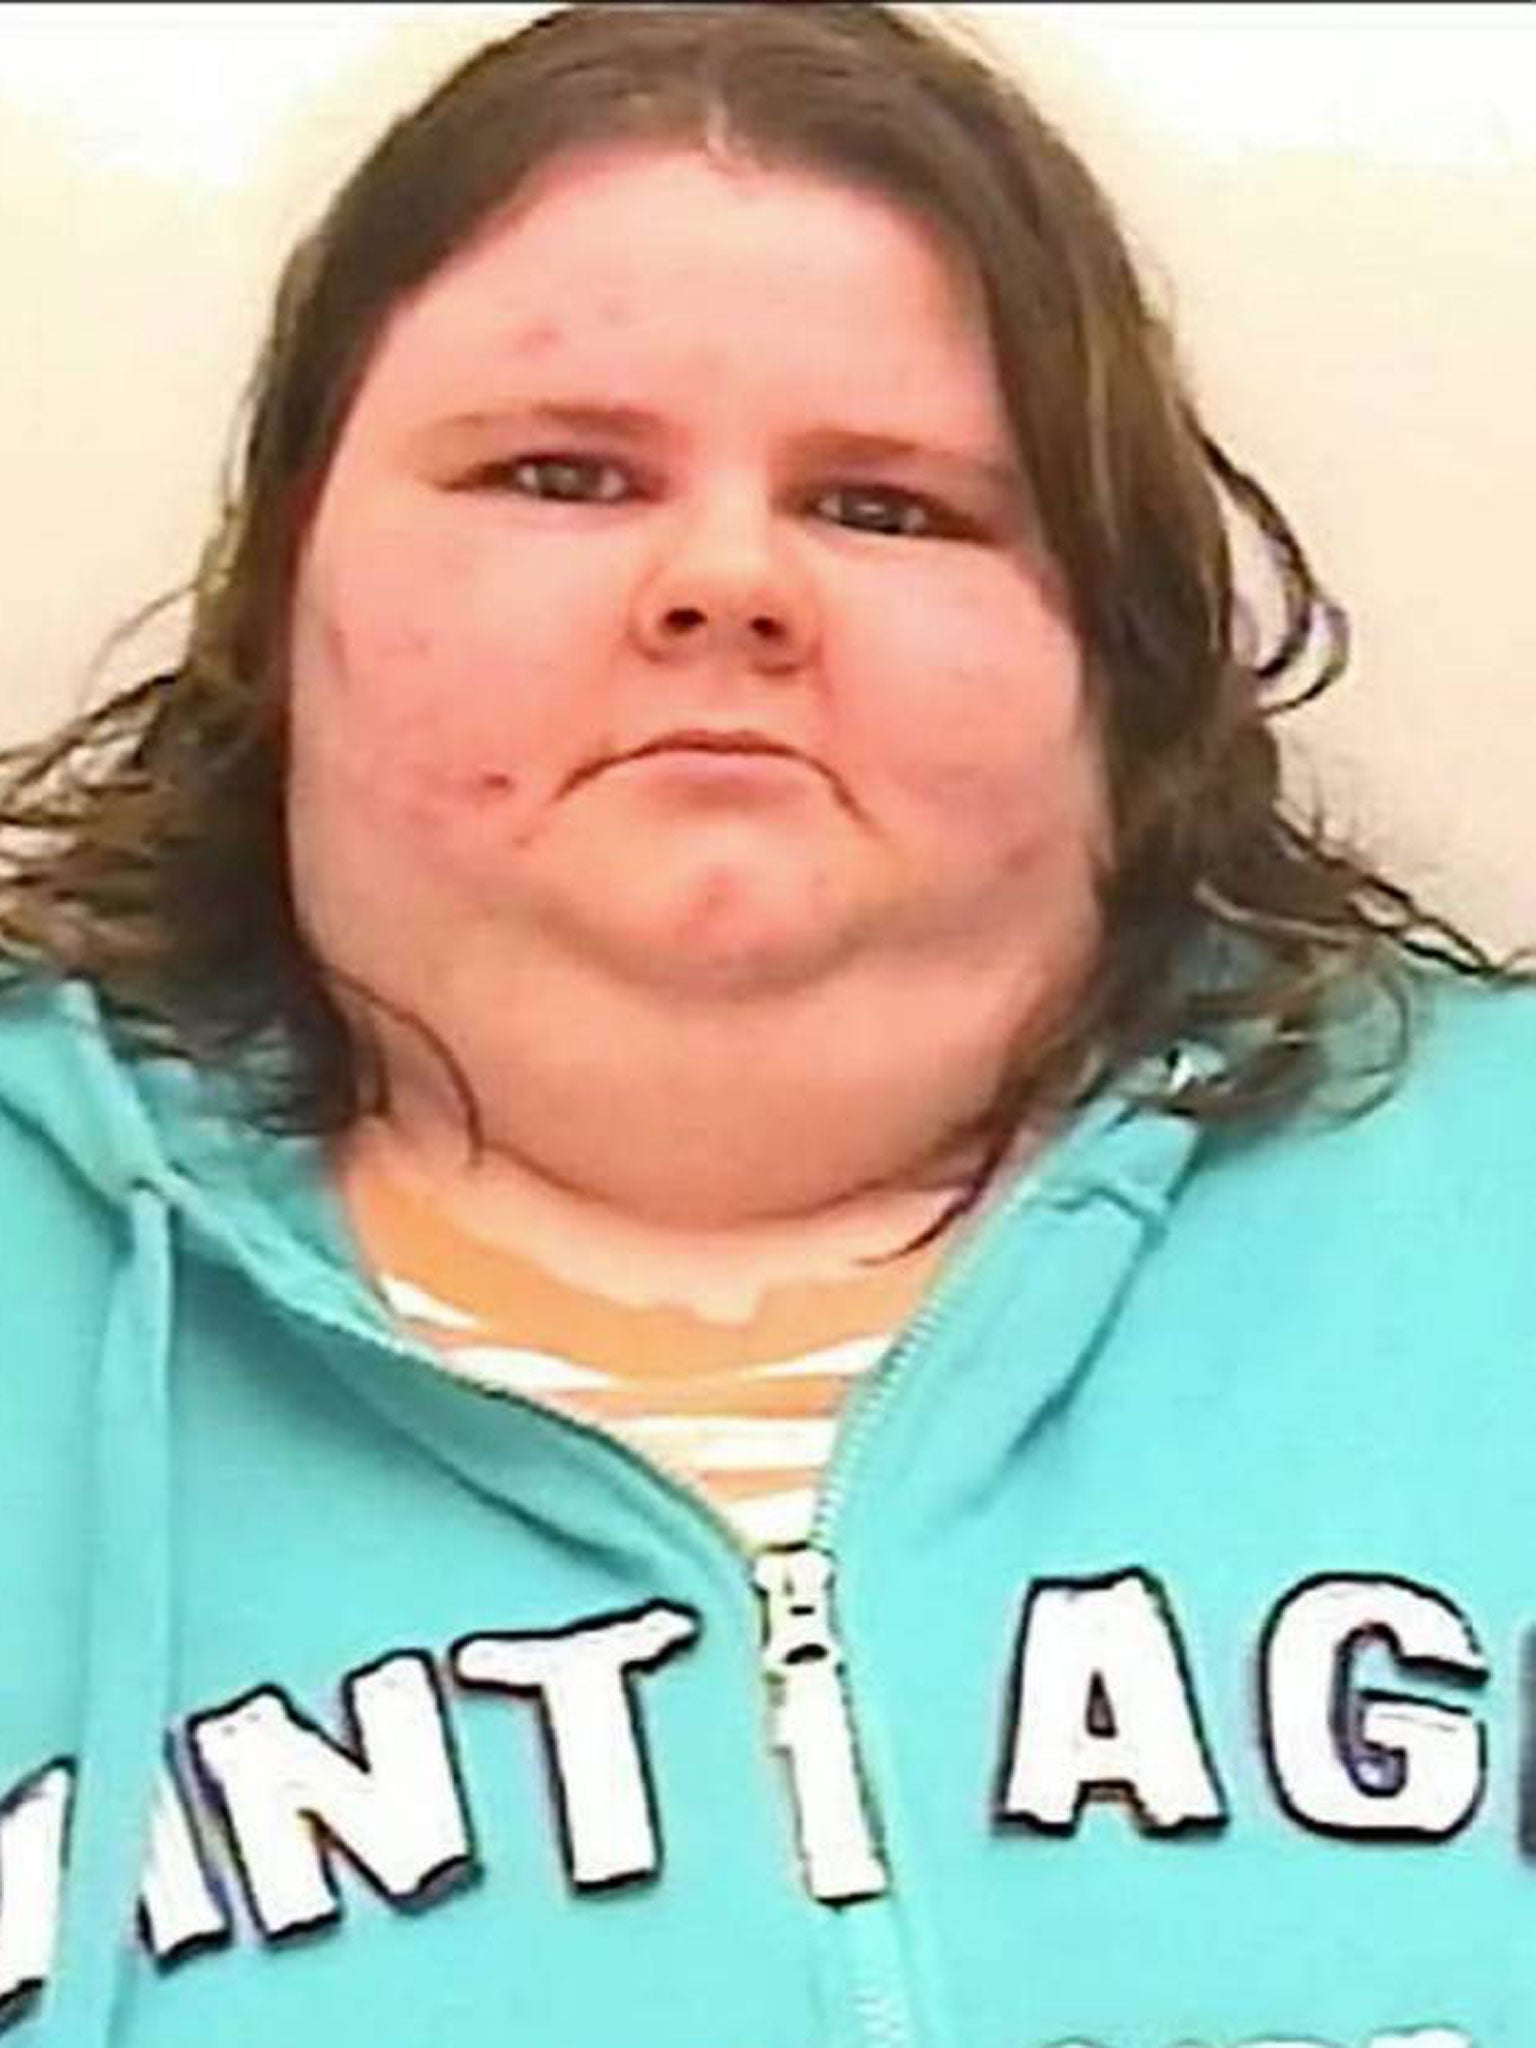 Michelle Chapman has been sentenced to 20 months in prison for setting up fake Facebook profiles to send herself offensive messages